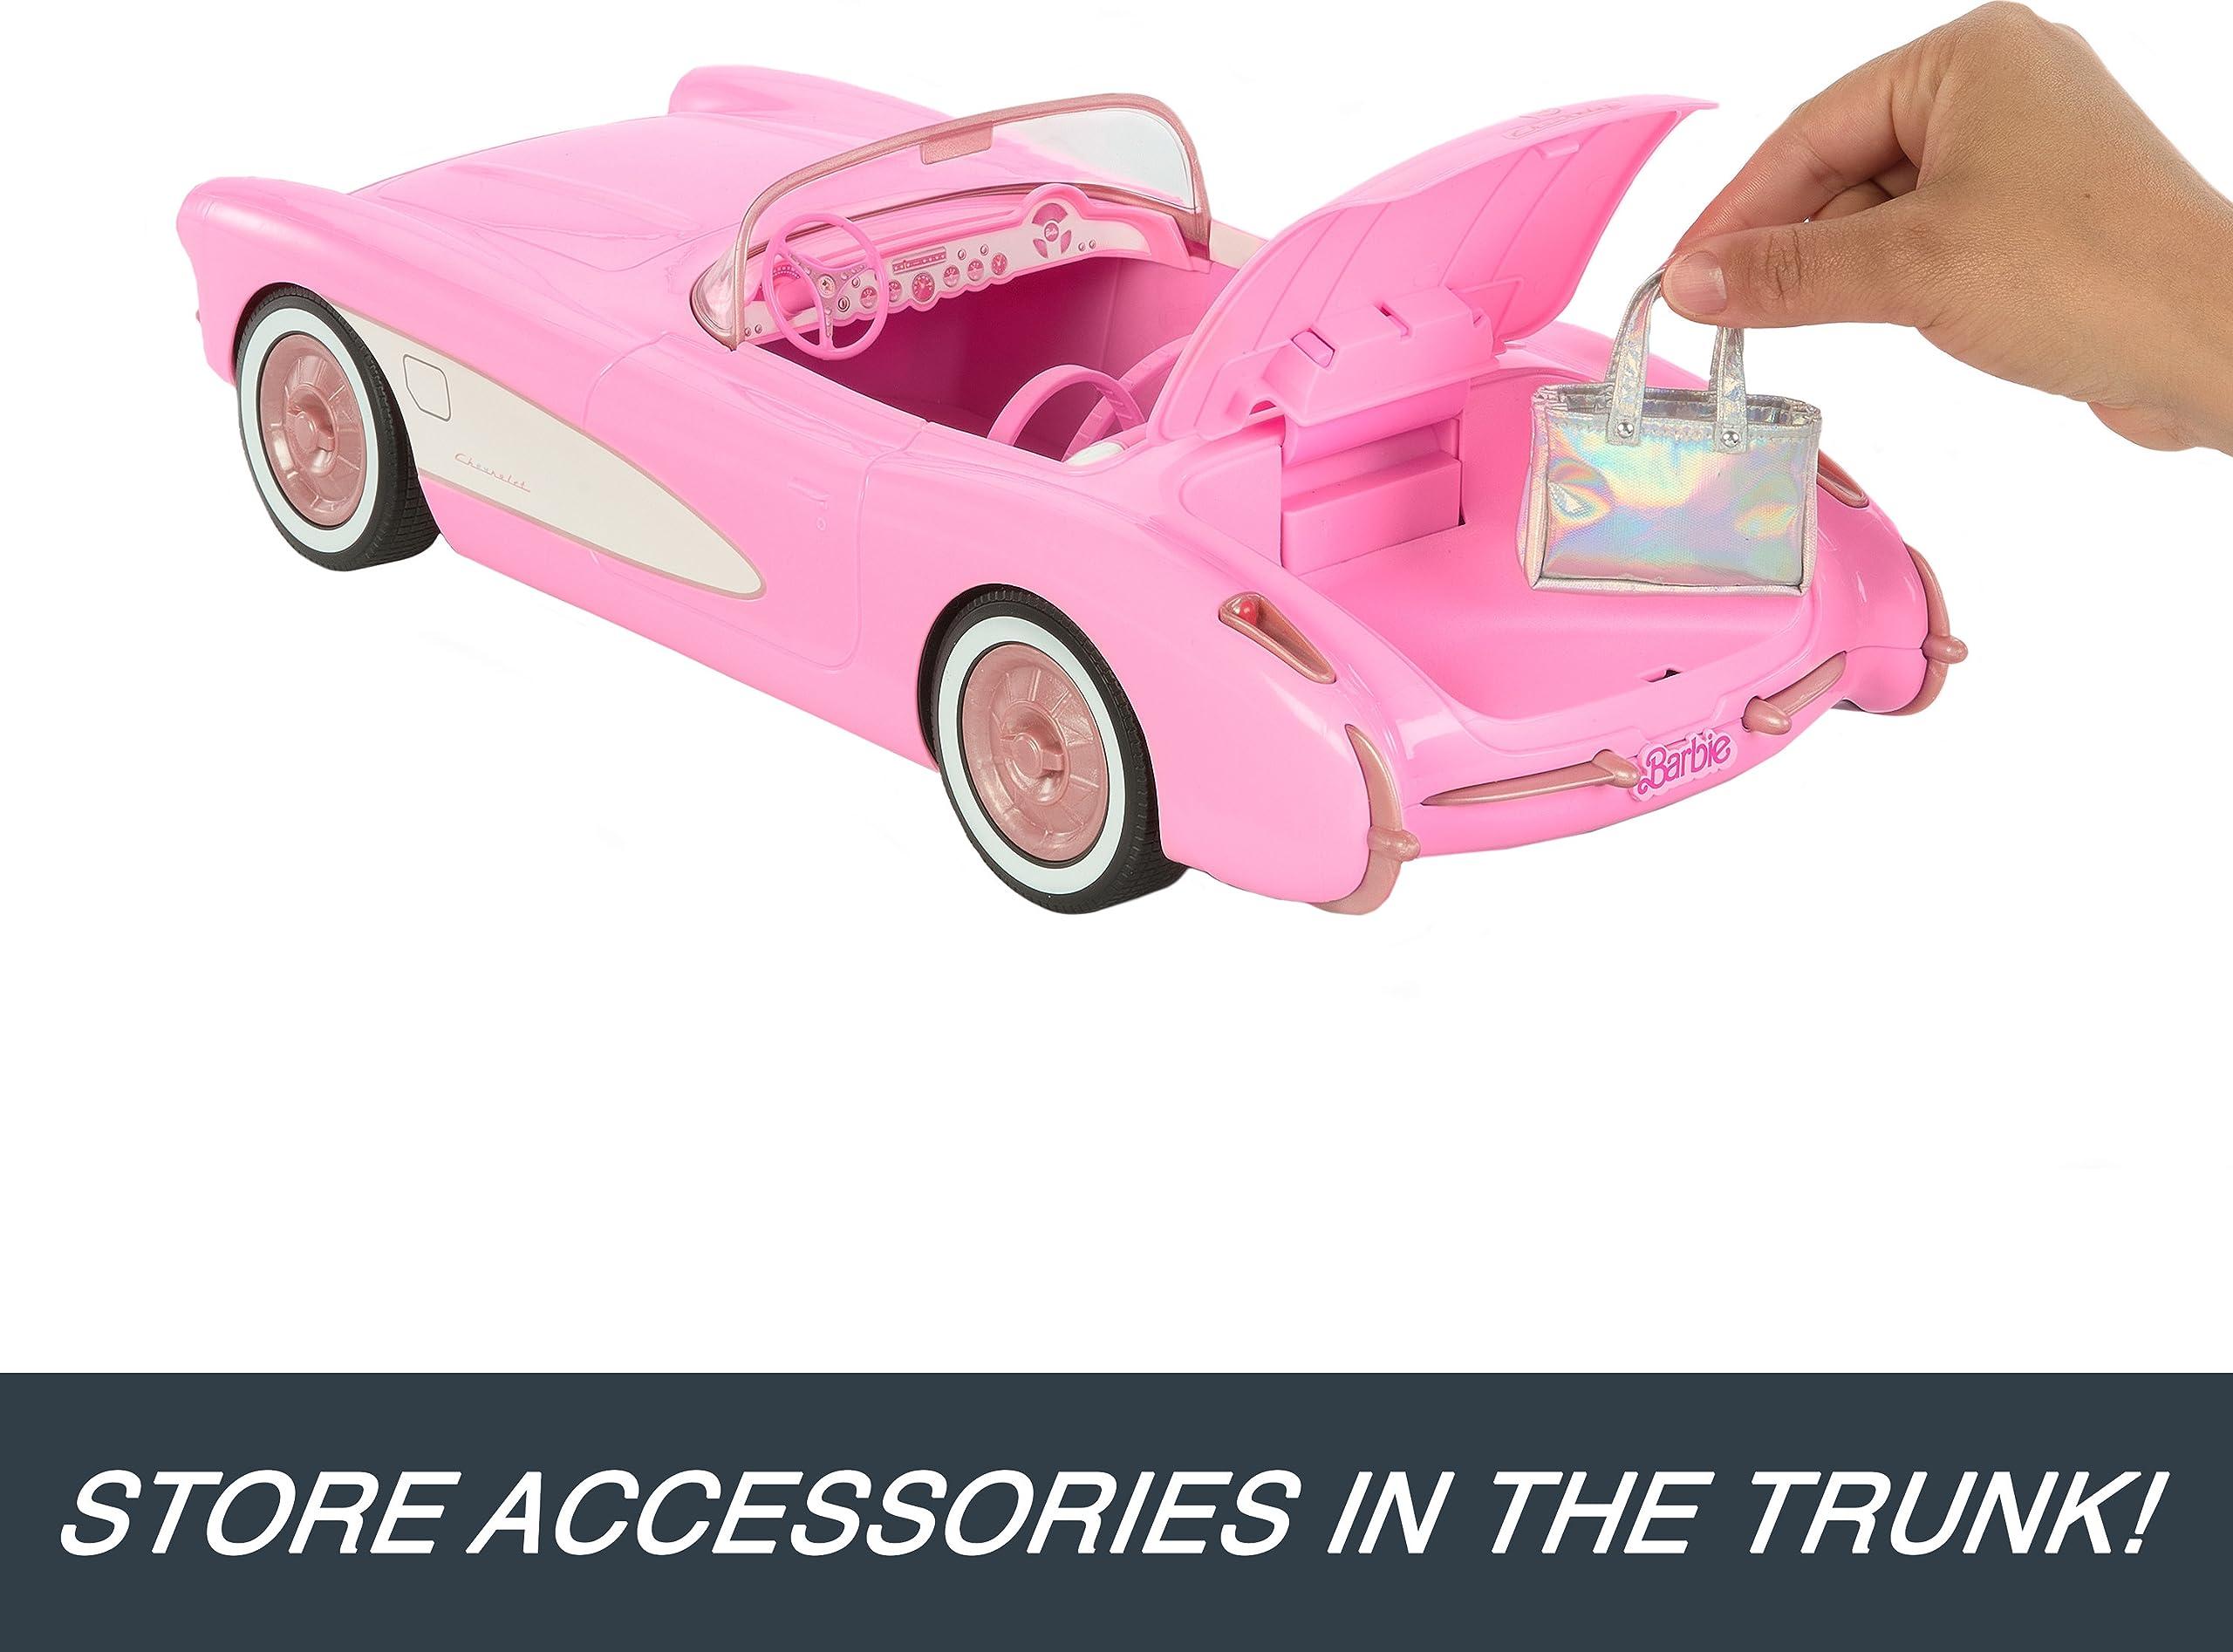 Barbie Remote Control Car Corvette: Benefits and Tips for Playing with a Barbie RC Car Corvette